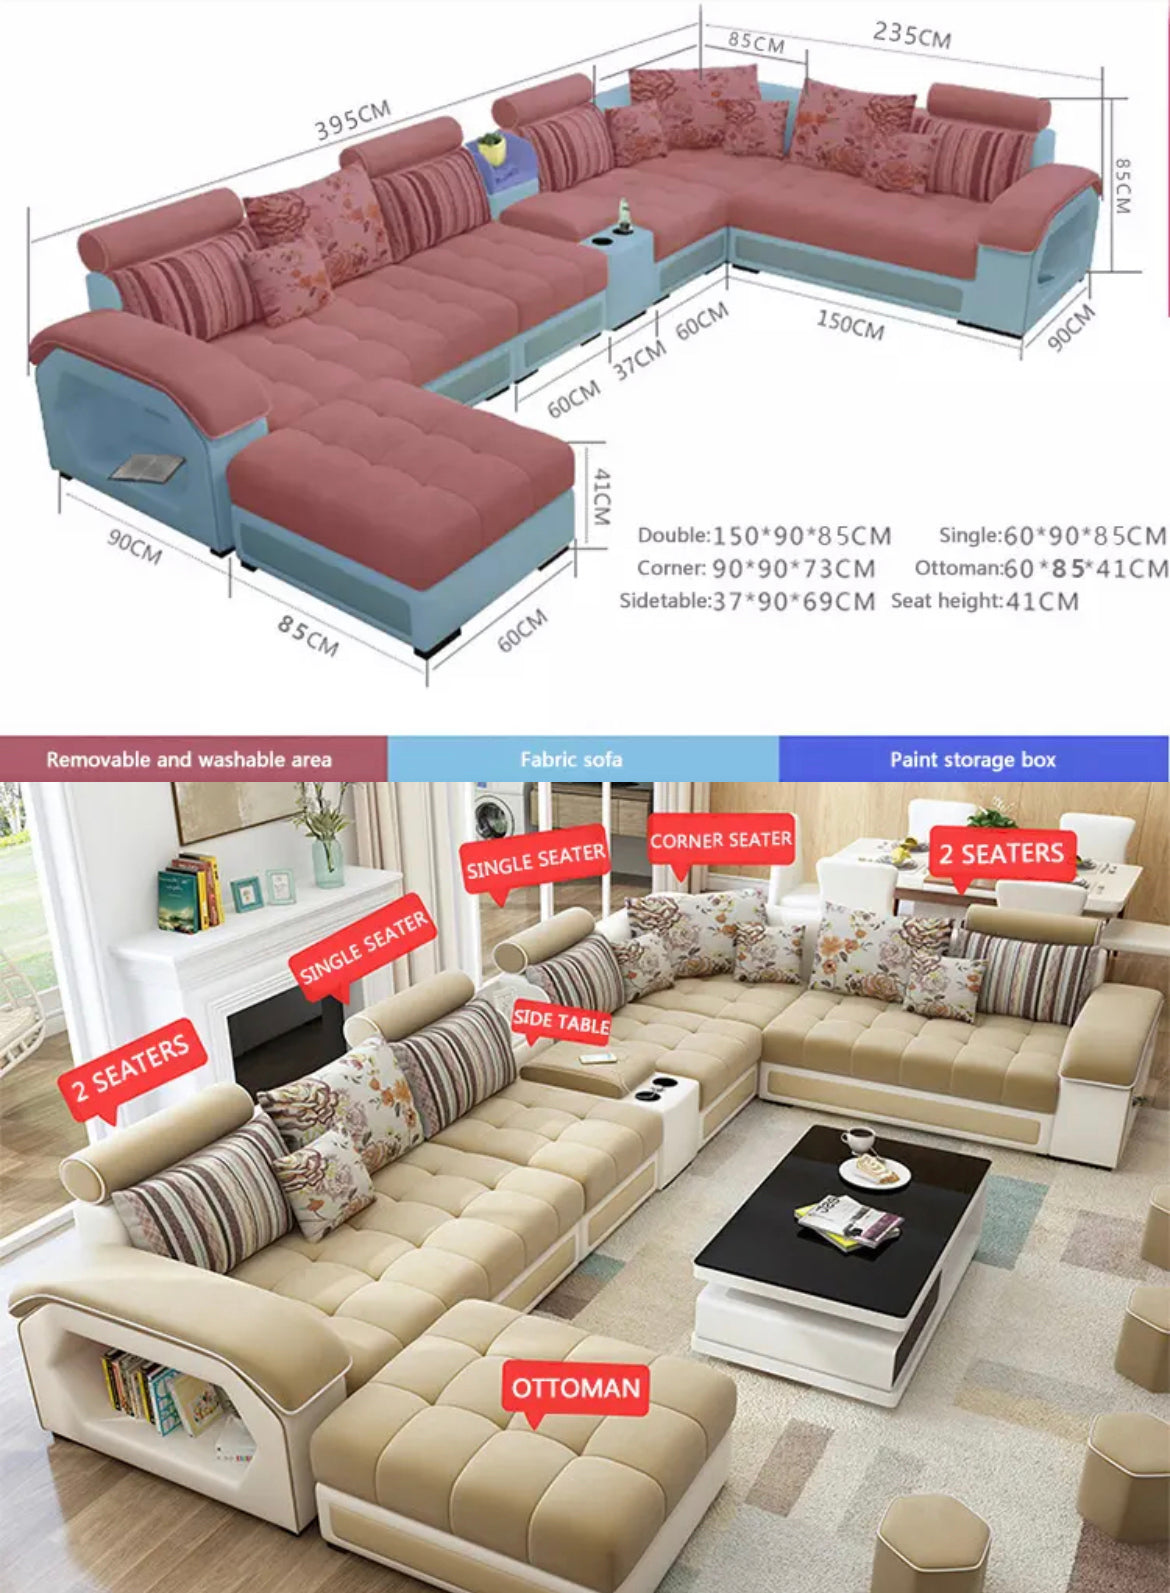  Sofa Living Room Furniture 7 Seater Couch Longue L U Shaped Sectional Leather Sofa Bed 